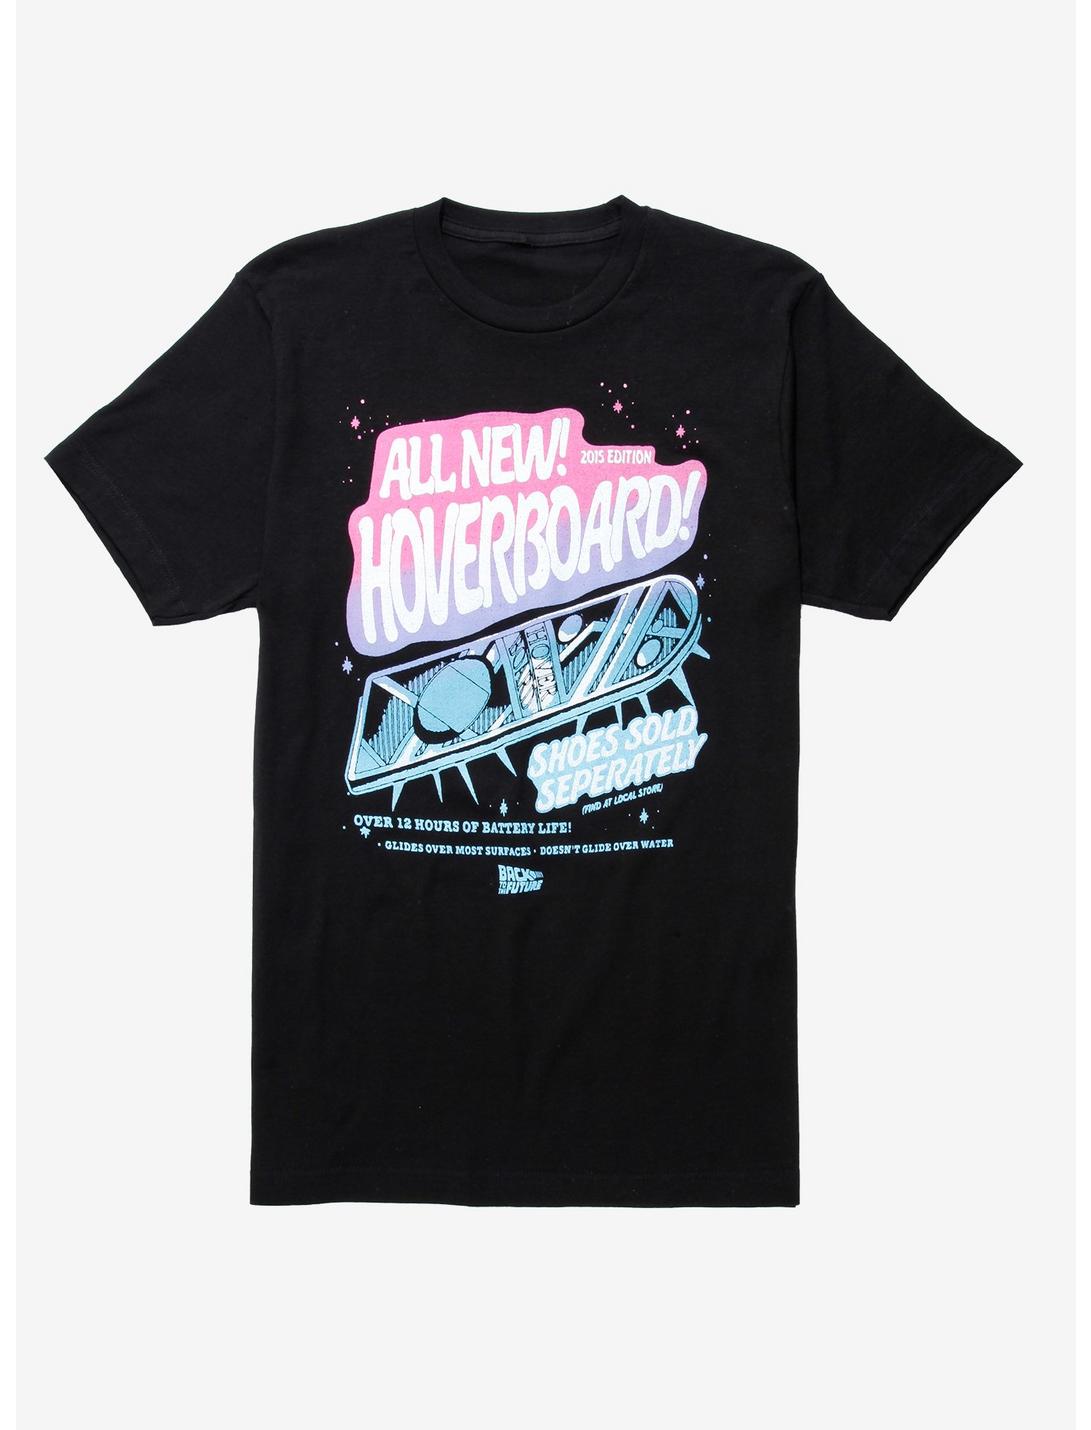 Back to the Future Hoverboard T-Shirt - BoxLunch Exclusive, BLACK, hi-res